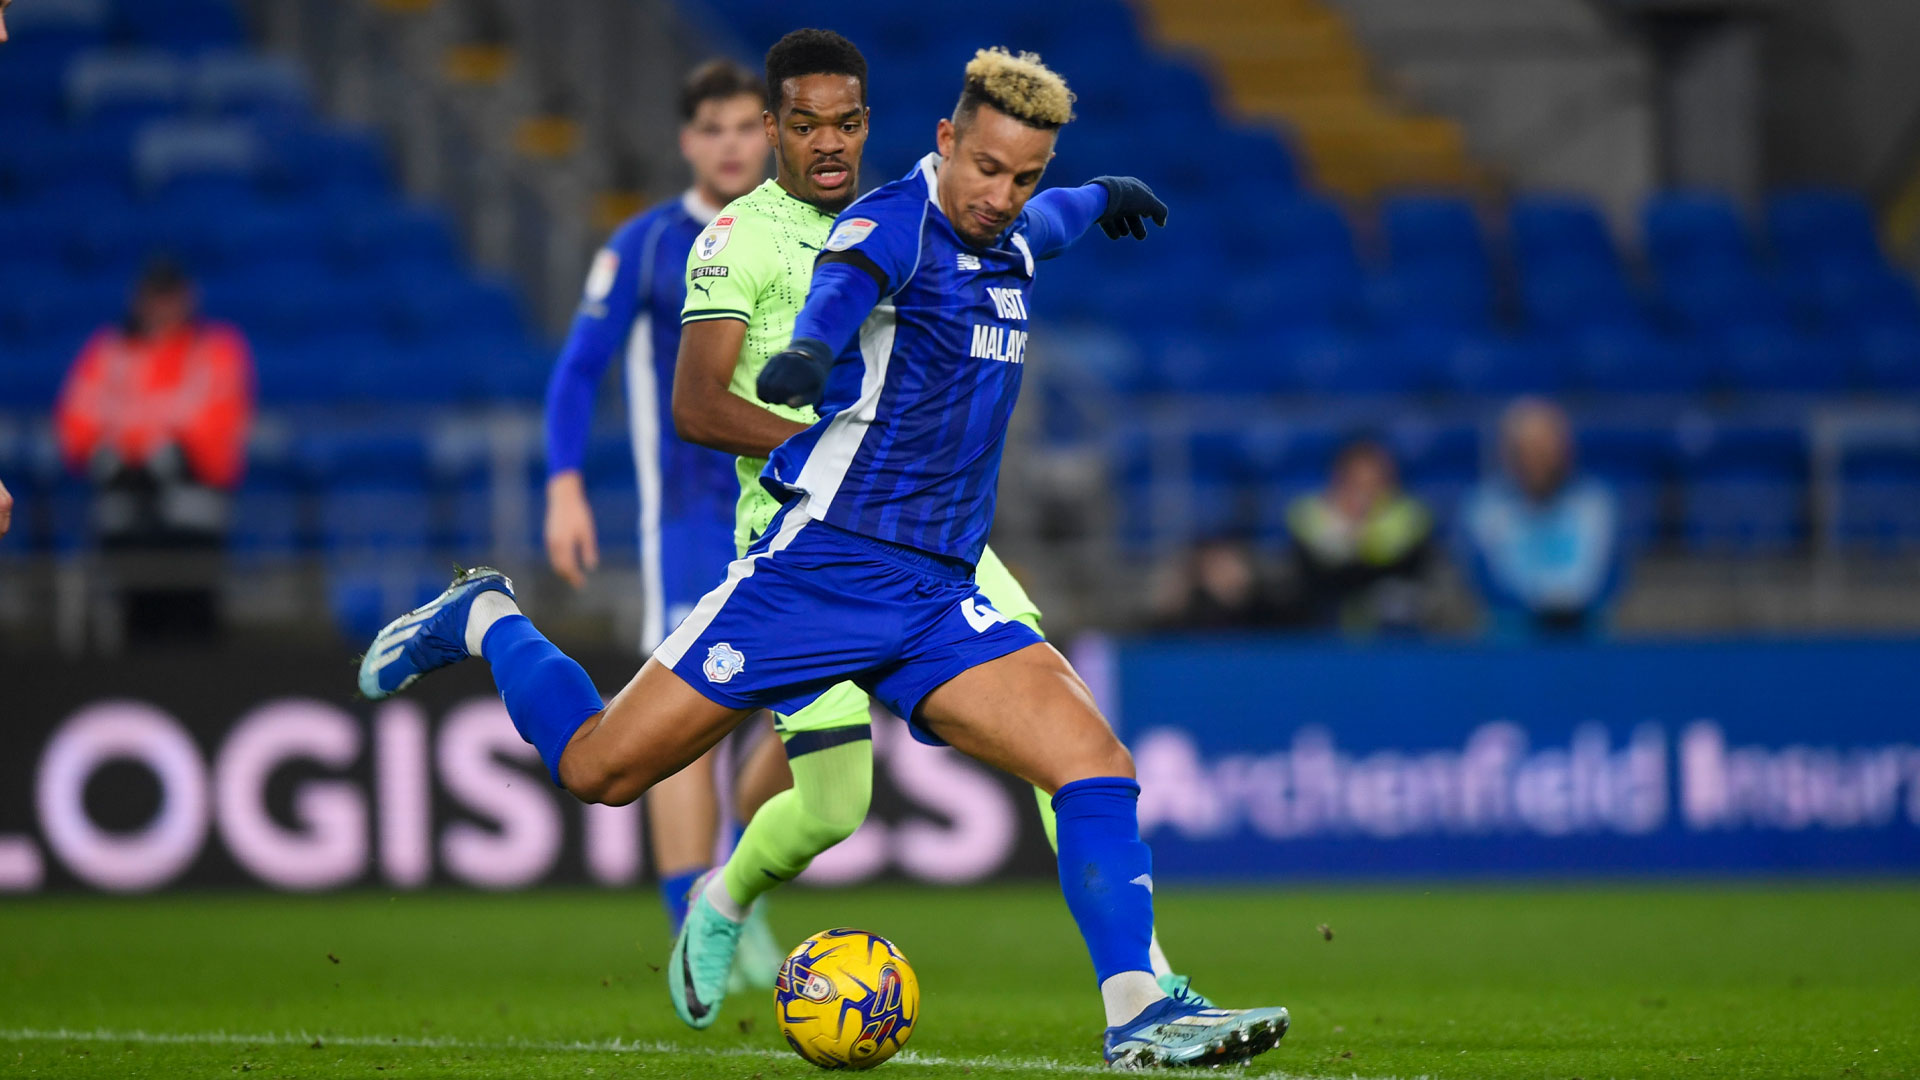 Callum Robinson in action for Cardiff City